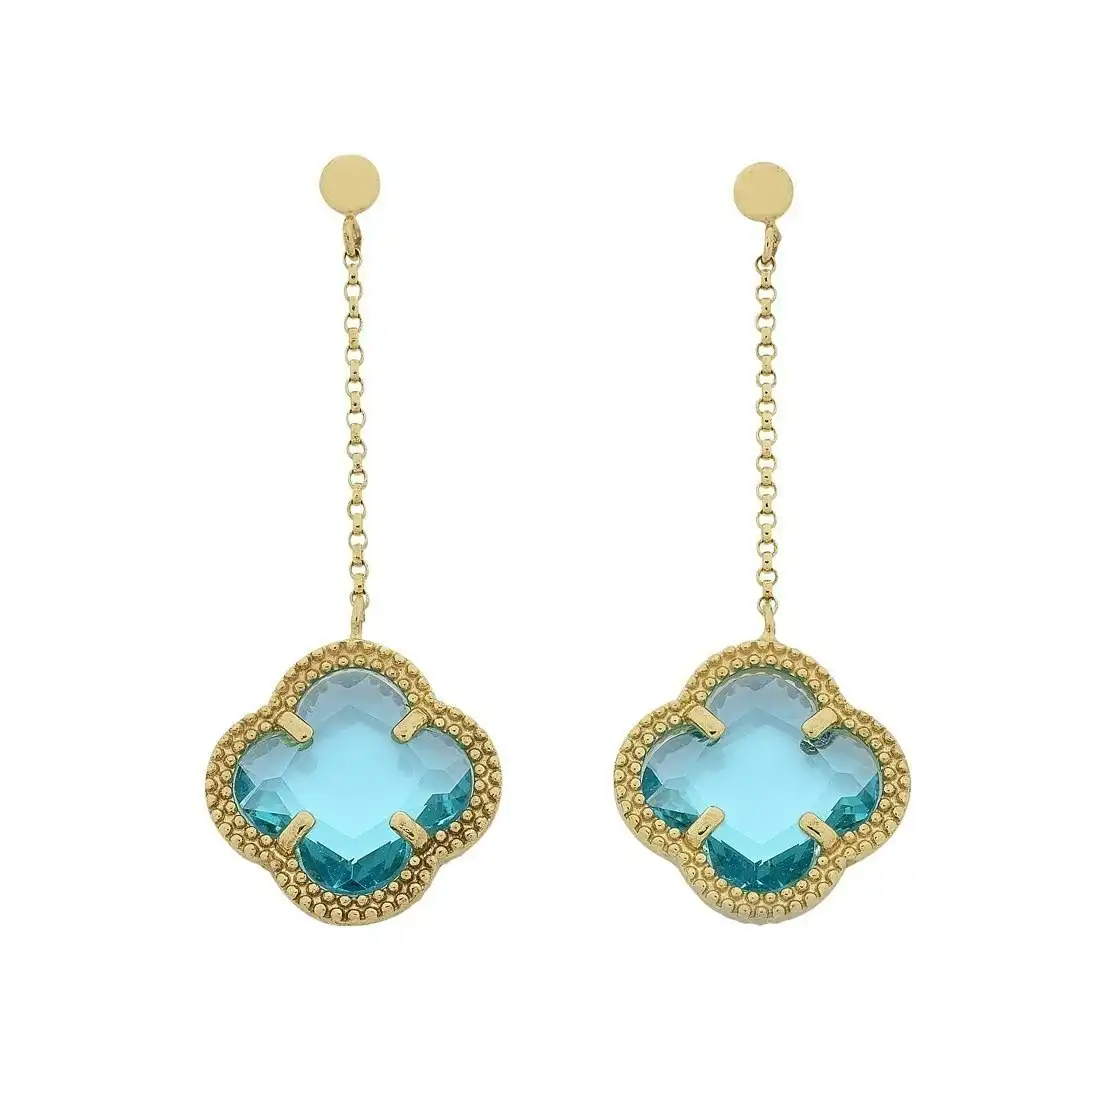 9ct Yellow Gold 4 Leaf Clover Blue Stone Drop Earrings